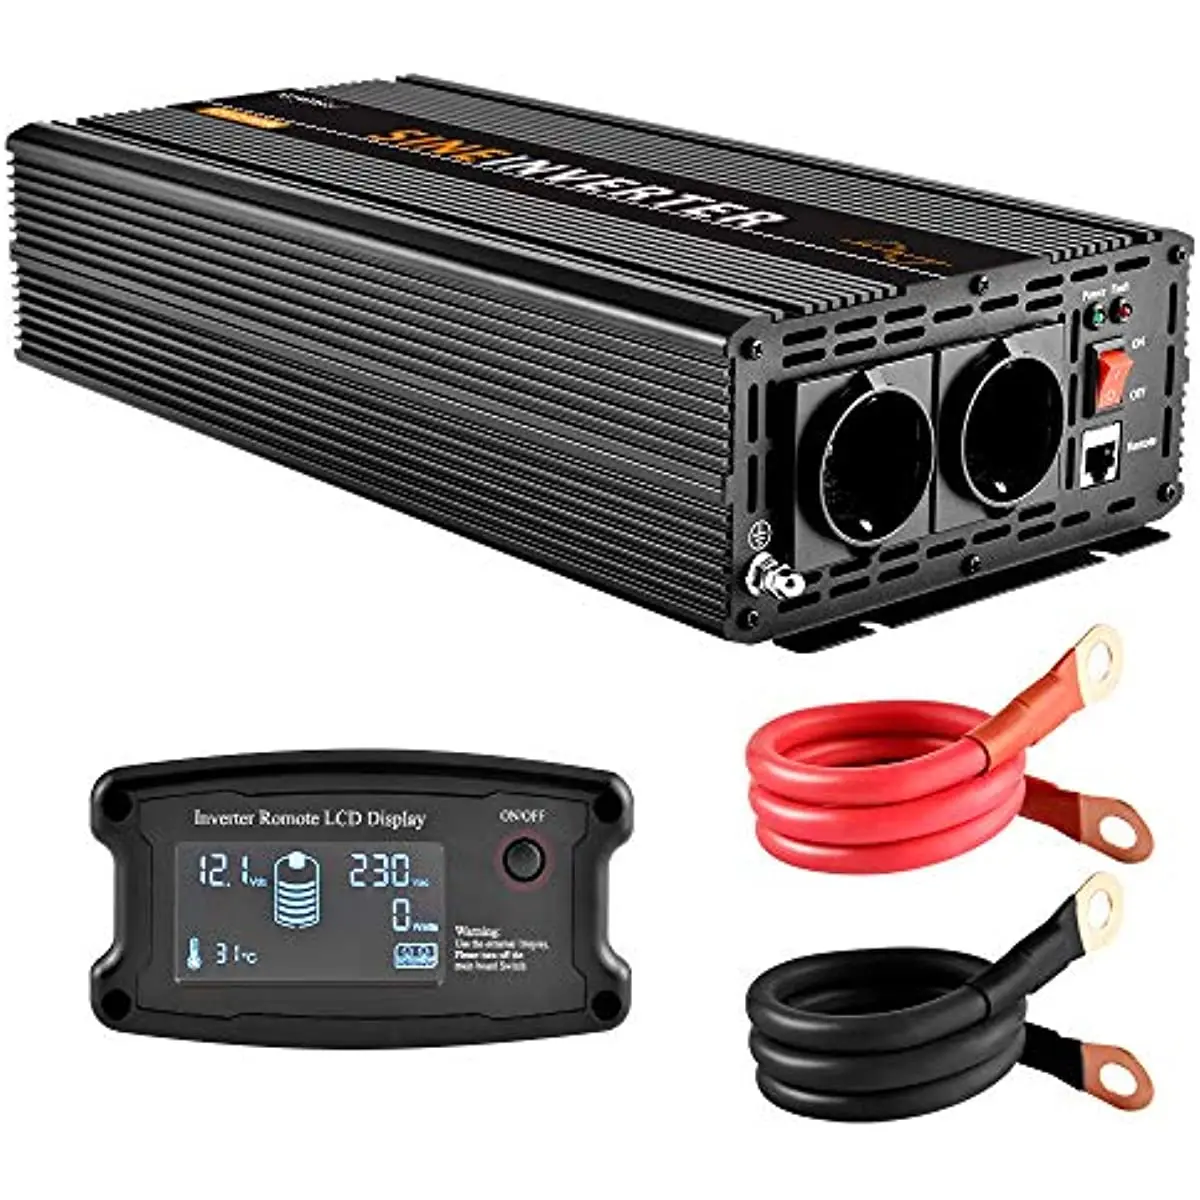 

EnRise 1000 W 1500 W 2500 W Pure Sine Wave Voltage Converter, Inverter, DC 12 V 24 V to AC 230 V with LCD Remote Control